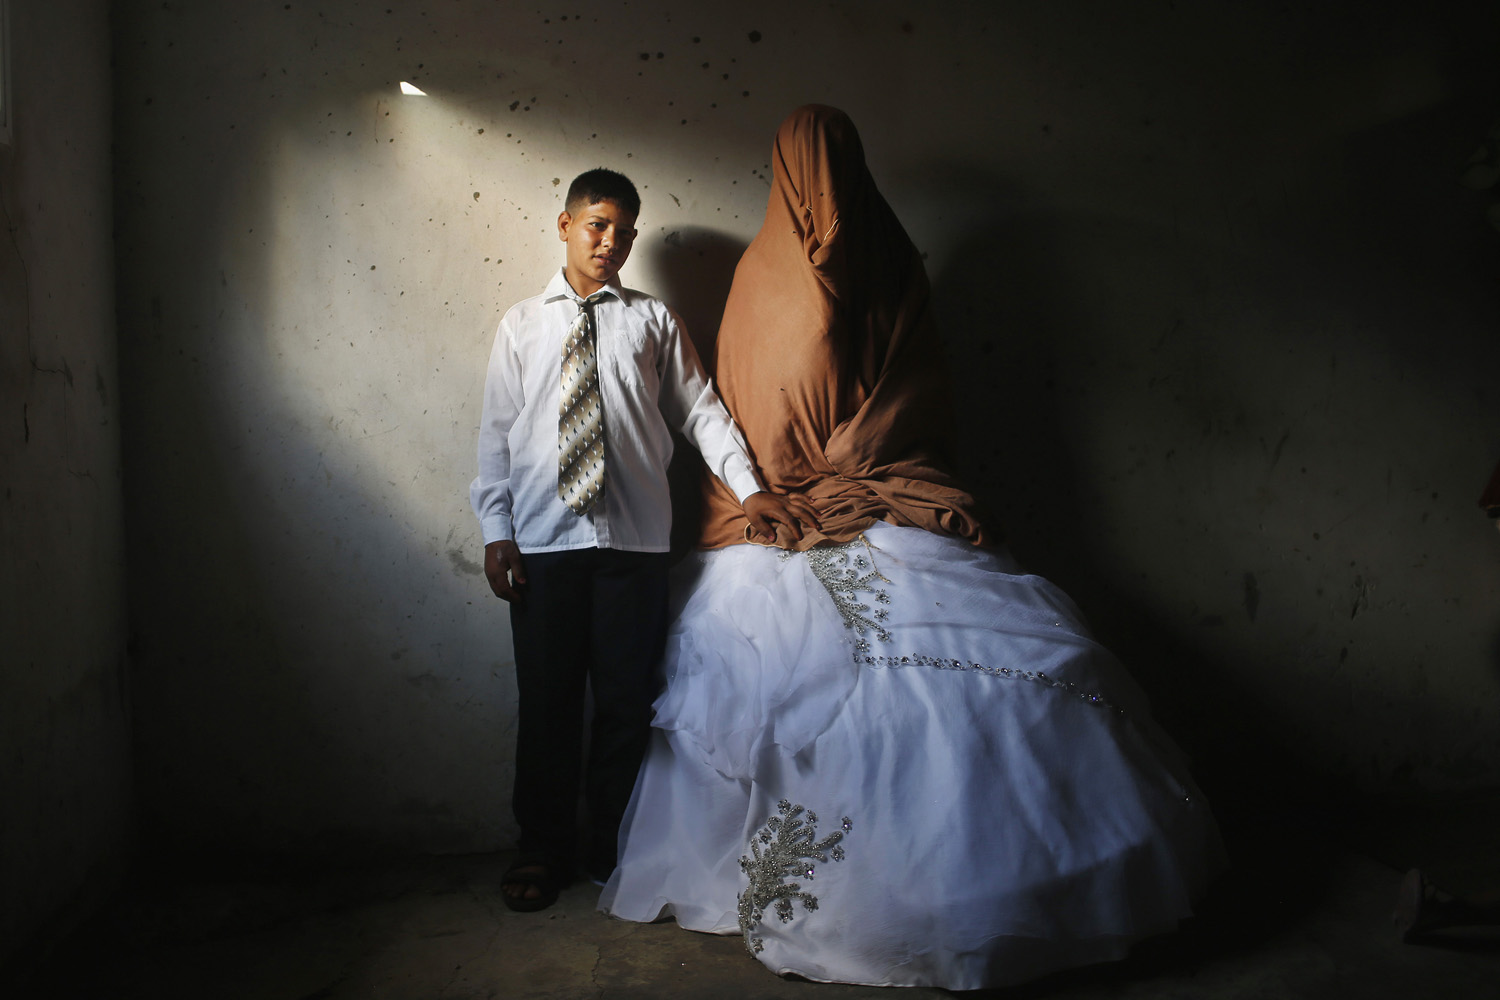 Palestinian groom Ahmed Soboh and his bride Tala stand inside Tala's house which damaged during Israeli strike in 2009, during wedding party in Beit Lahiya